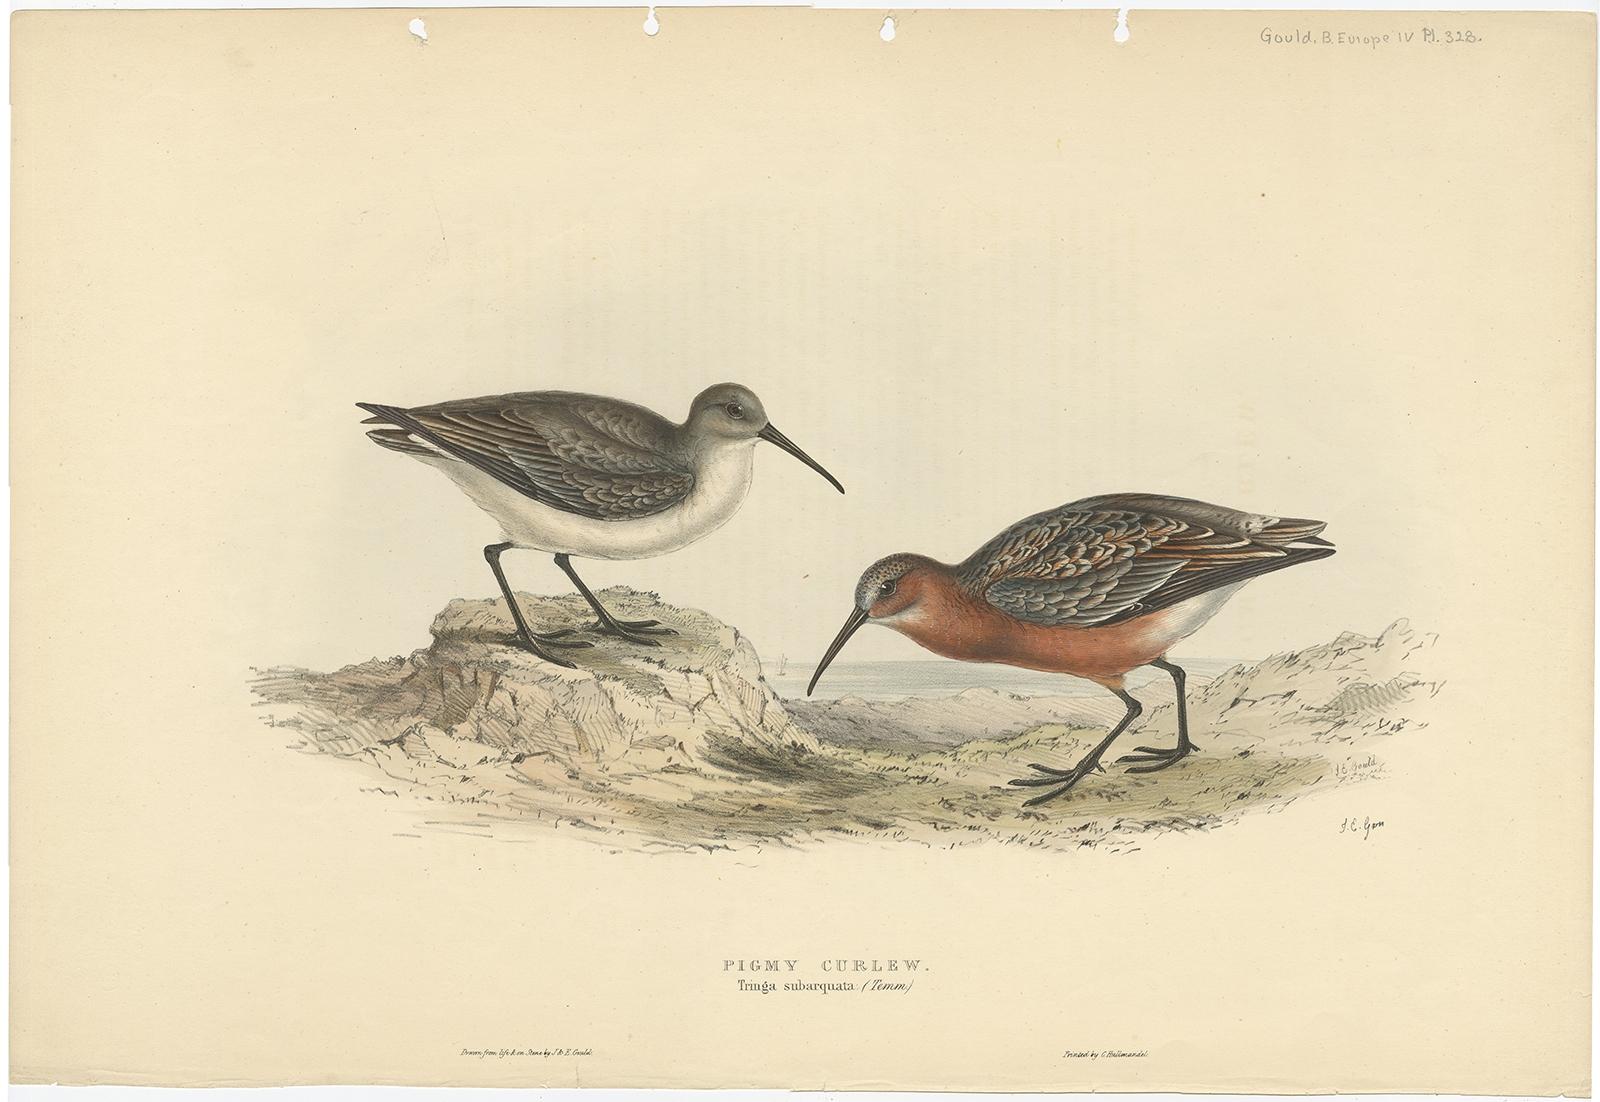 Antique bird print titled 'Pigmy Curlew'. Old bird print depicting the pygmy curlew. This print originates from 'Birds of Europe' by J. Gould (1832-1837). 

Artists and Engravers: John Gould (1804 - 1881) was an English ornithologist and bird